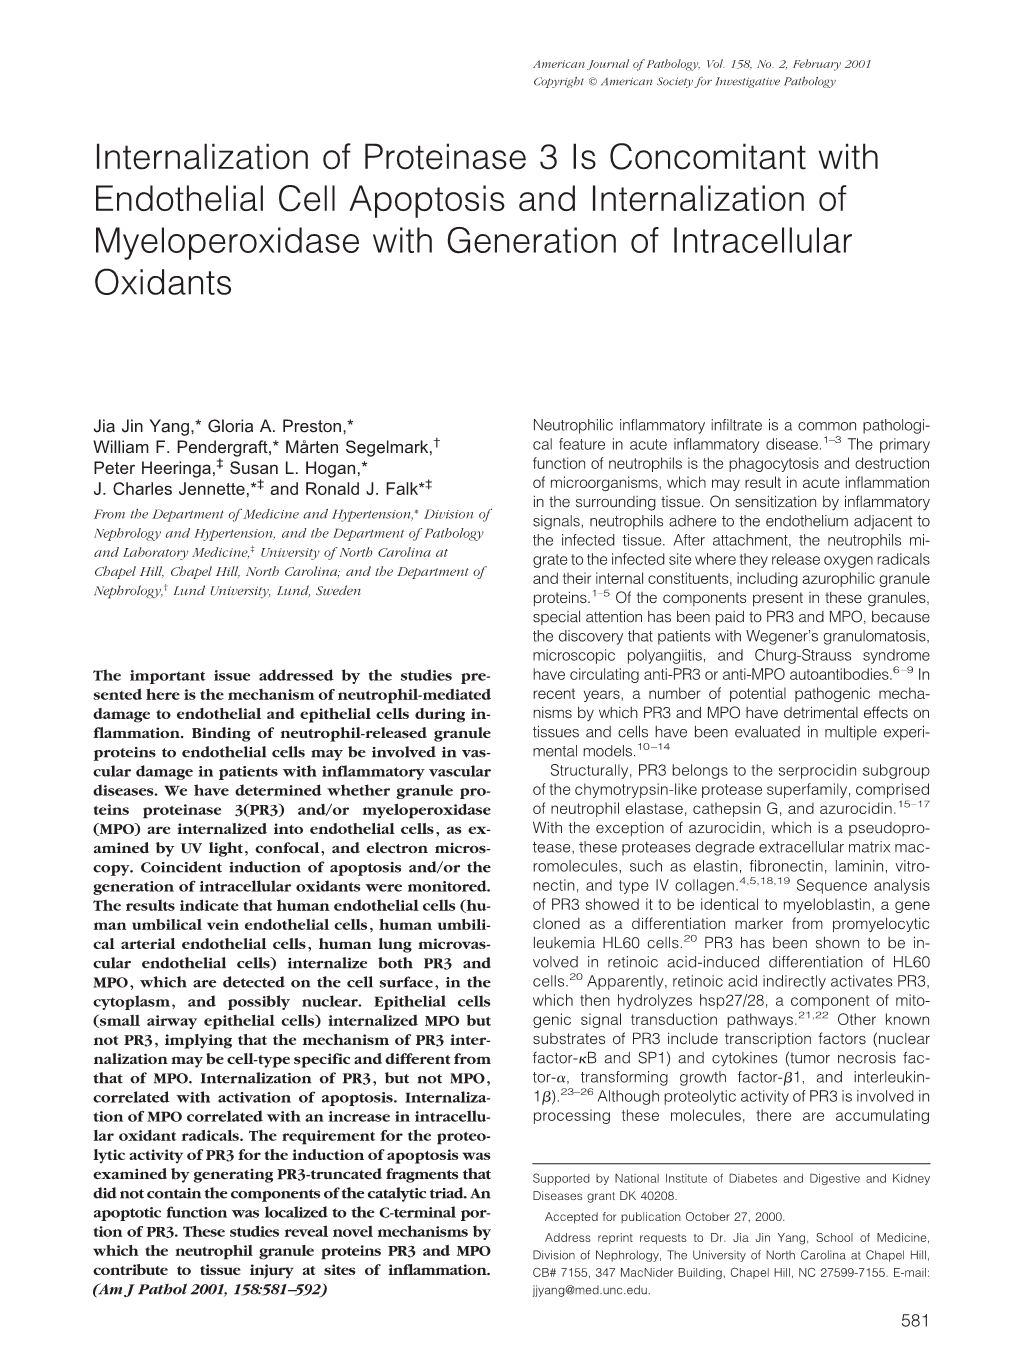 Internalization of Proteinase 3 Is Concomitant with Endothelial Cell Apoptosis and Internalization of Myeloperoxidase with Generation of Intracellular Oxidants